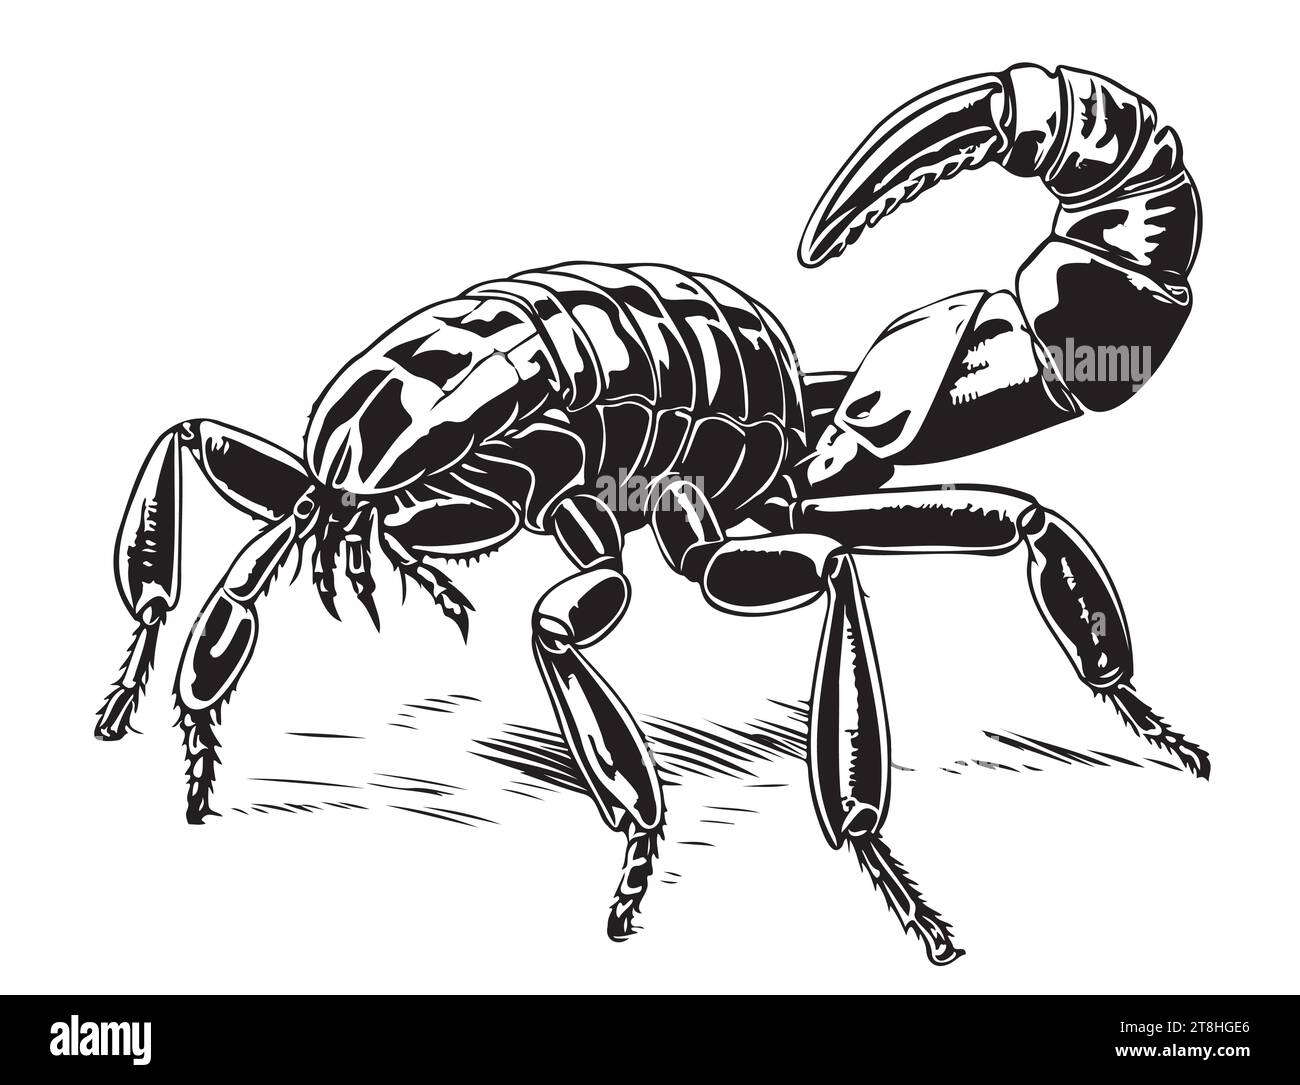 Hand drawn sketch of scorpion. Retro realistic animal isolated. Vintage tattoo. Doodle line graphic design. Tattoo design. Black and white drawing scorpion. Vector illustration. Stock Vector